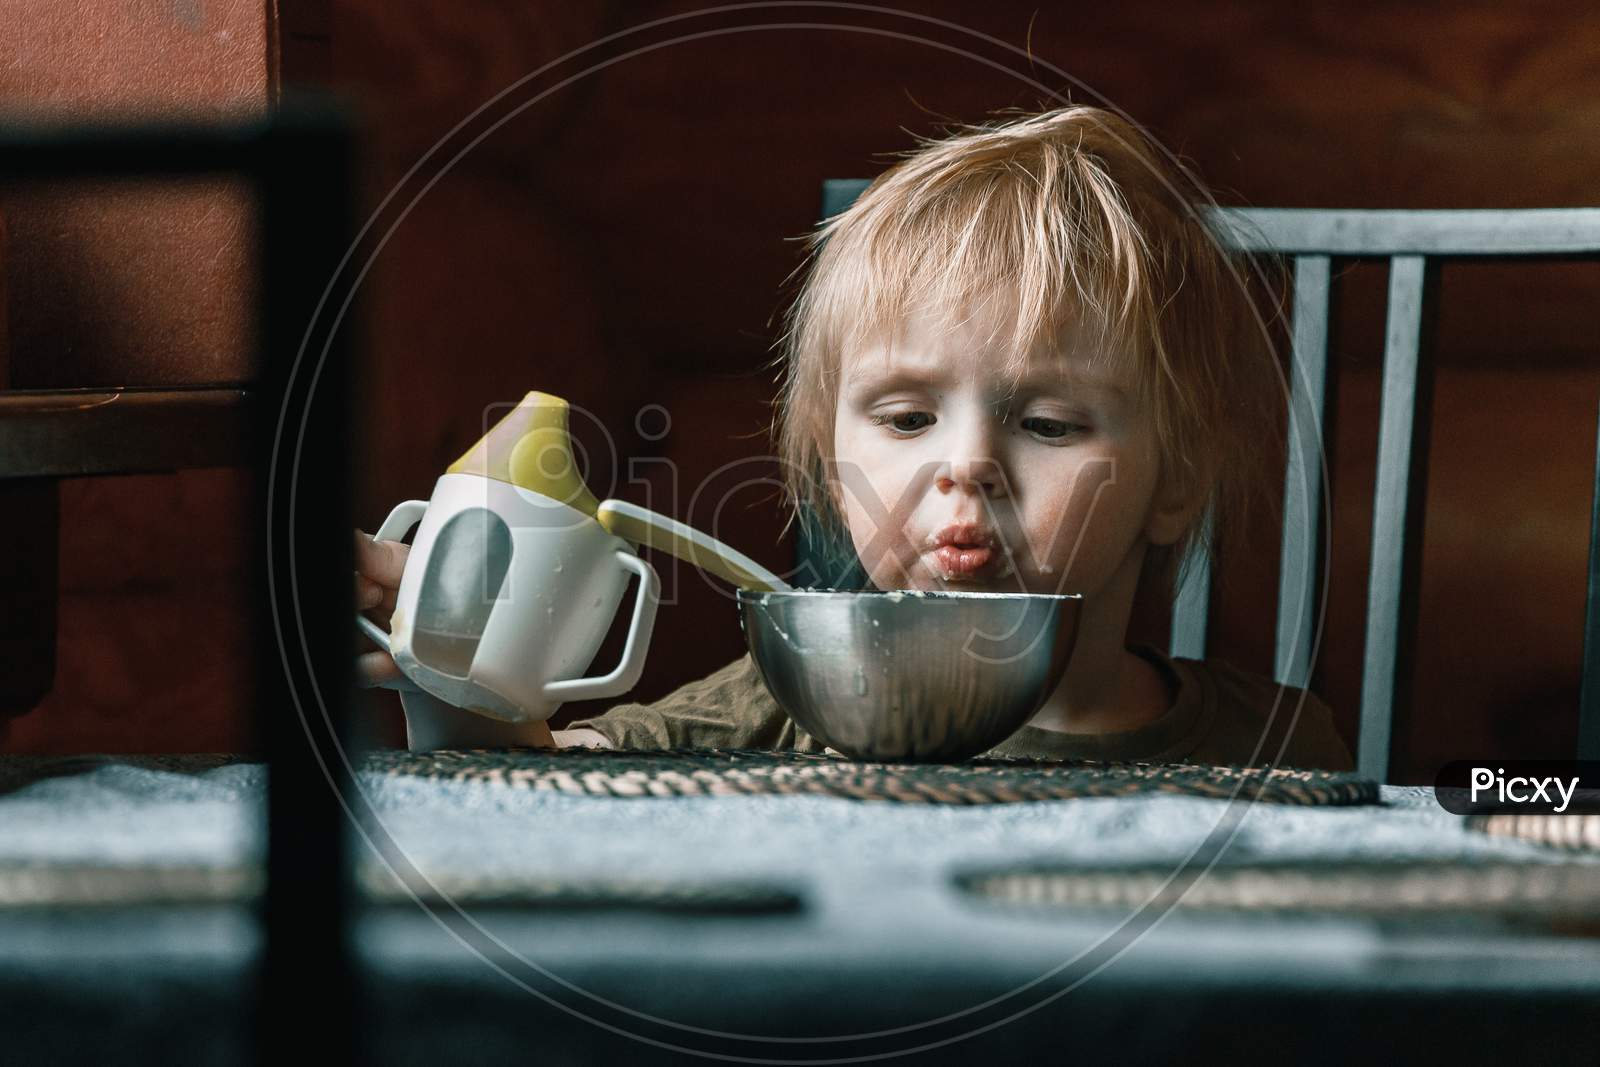 A Small Child Of Two Years Old In The Kitchen Eats Mashed Potatoes And Drinks Water From A Baby Sippy Cup At The Dining Table In The Kitchen